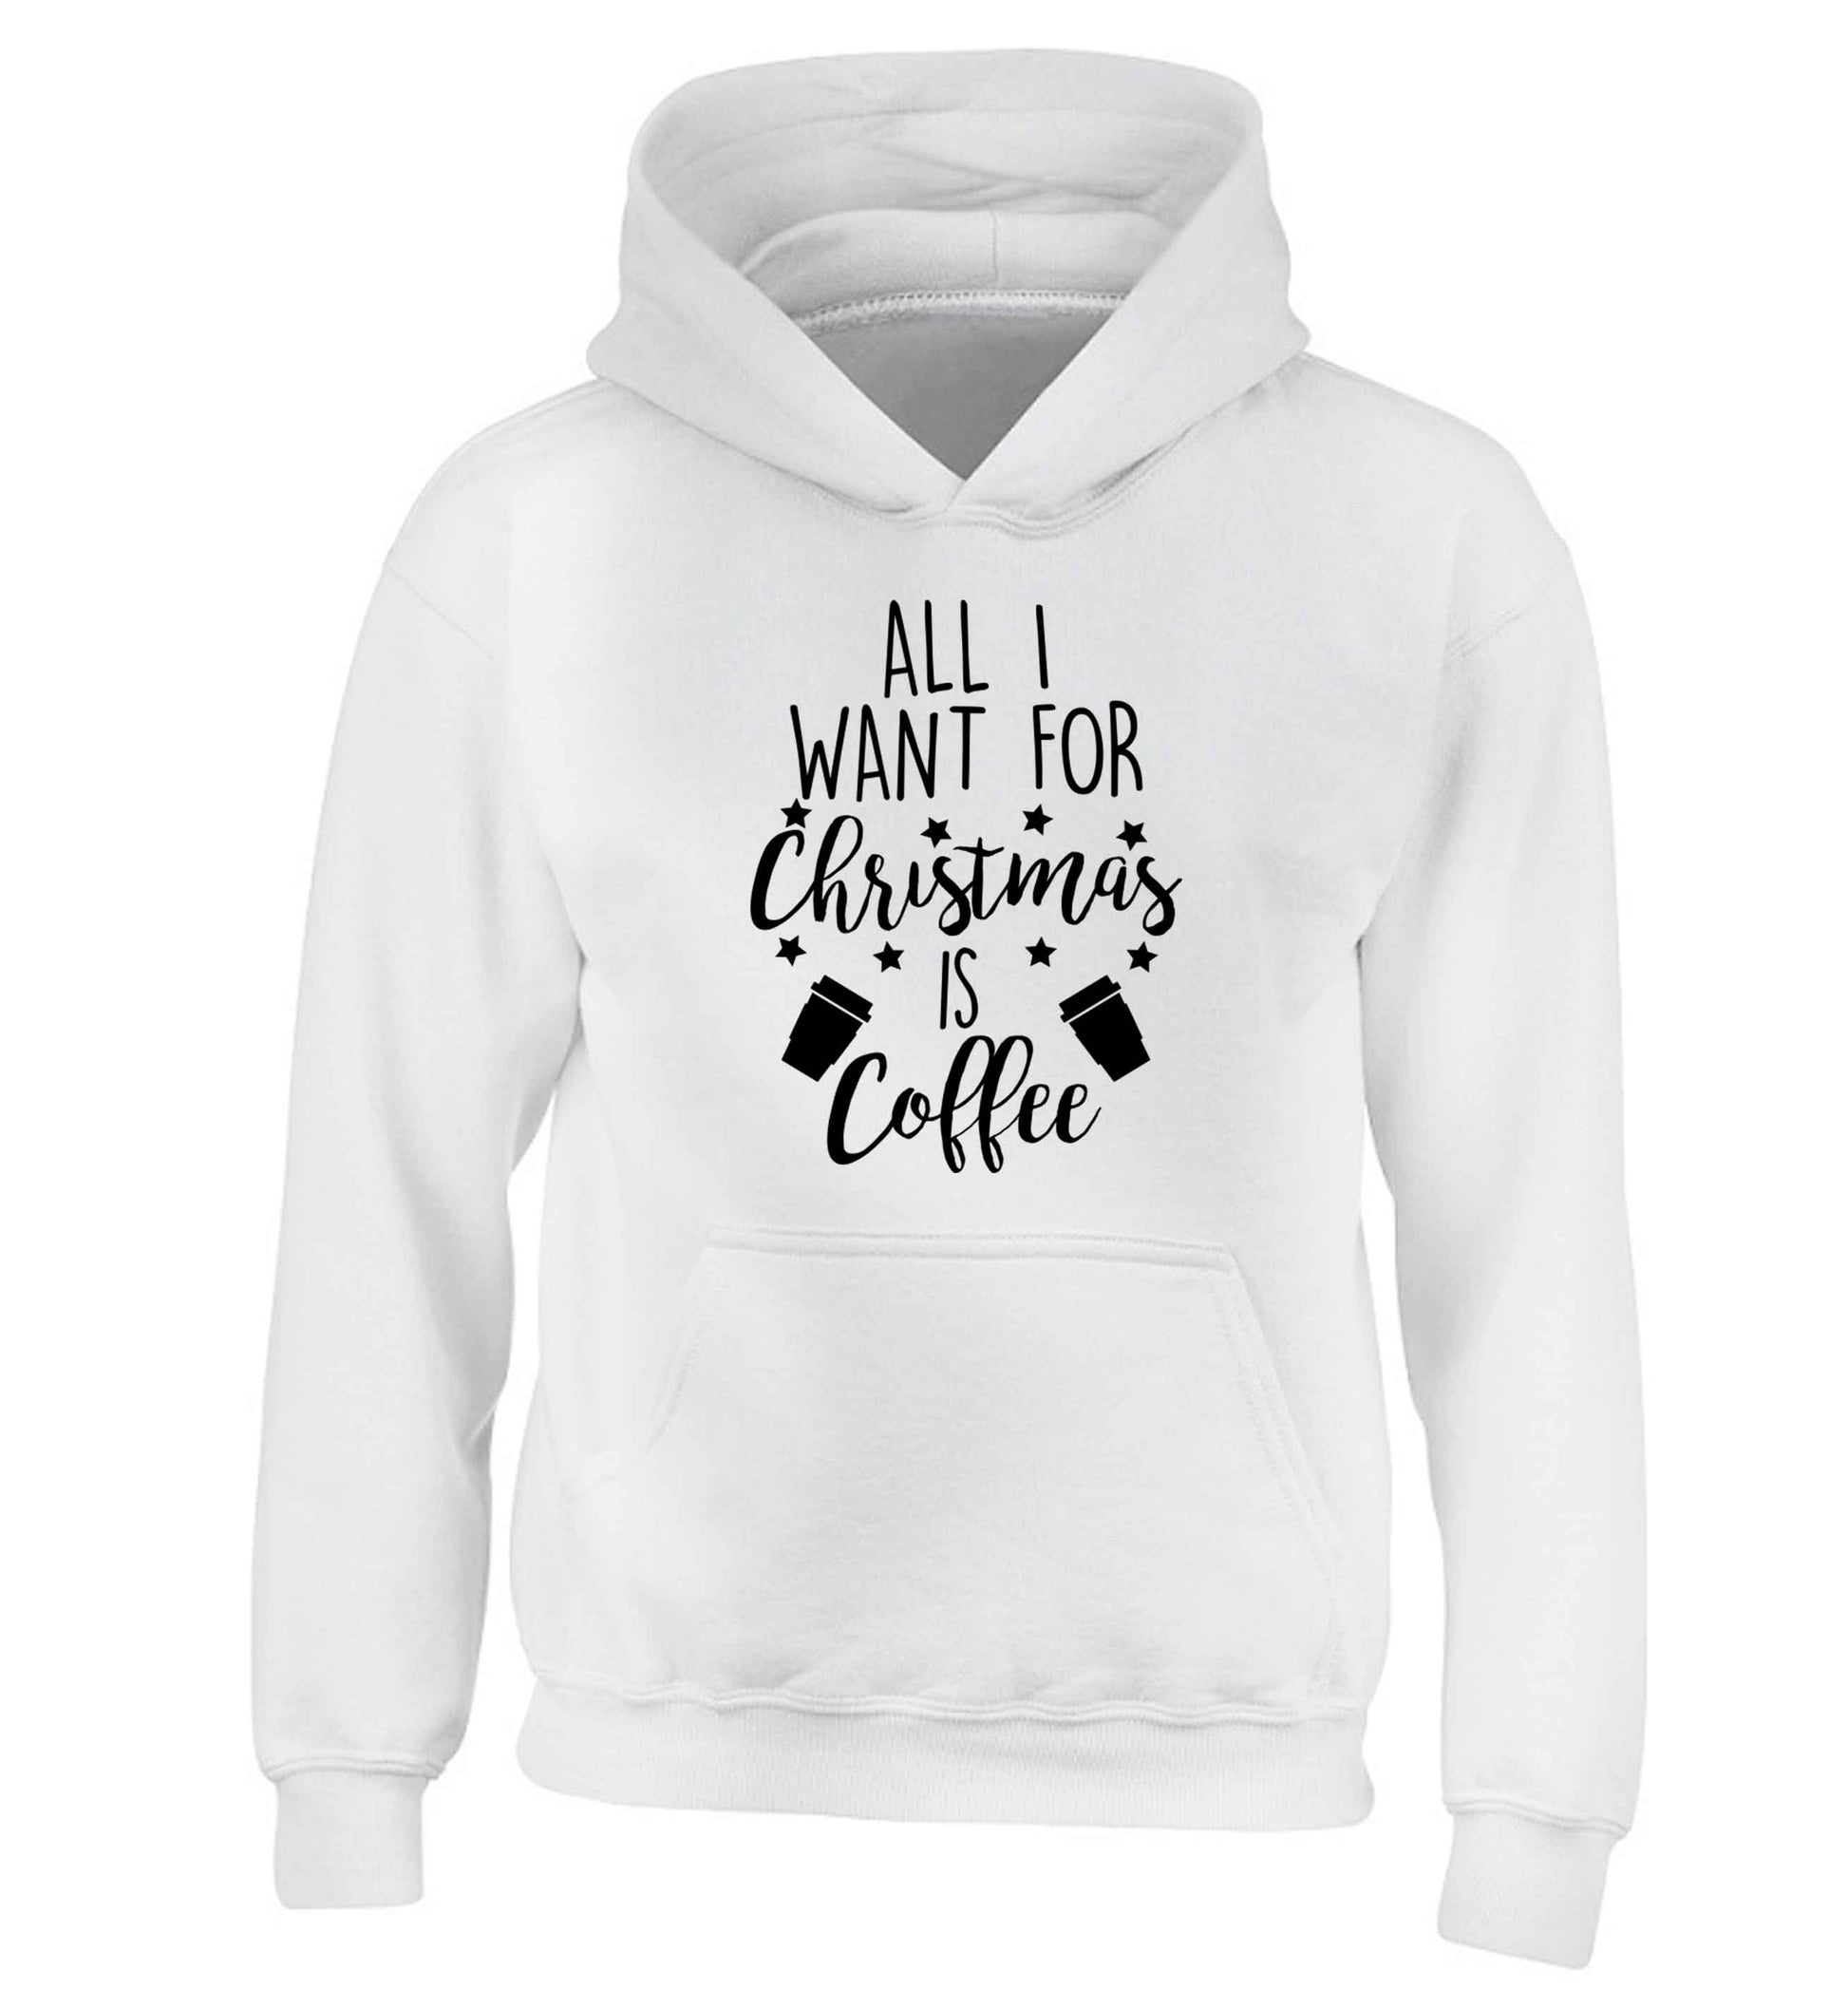 All I want for Christmas is coffee children's white hoodie 12-13 Years